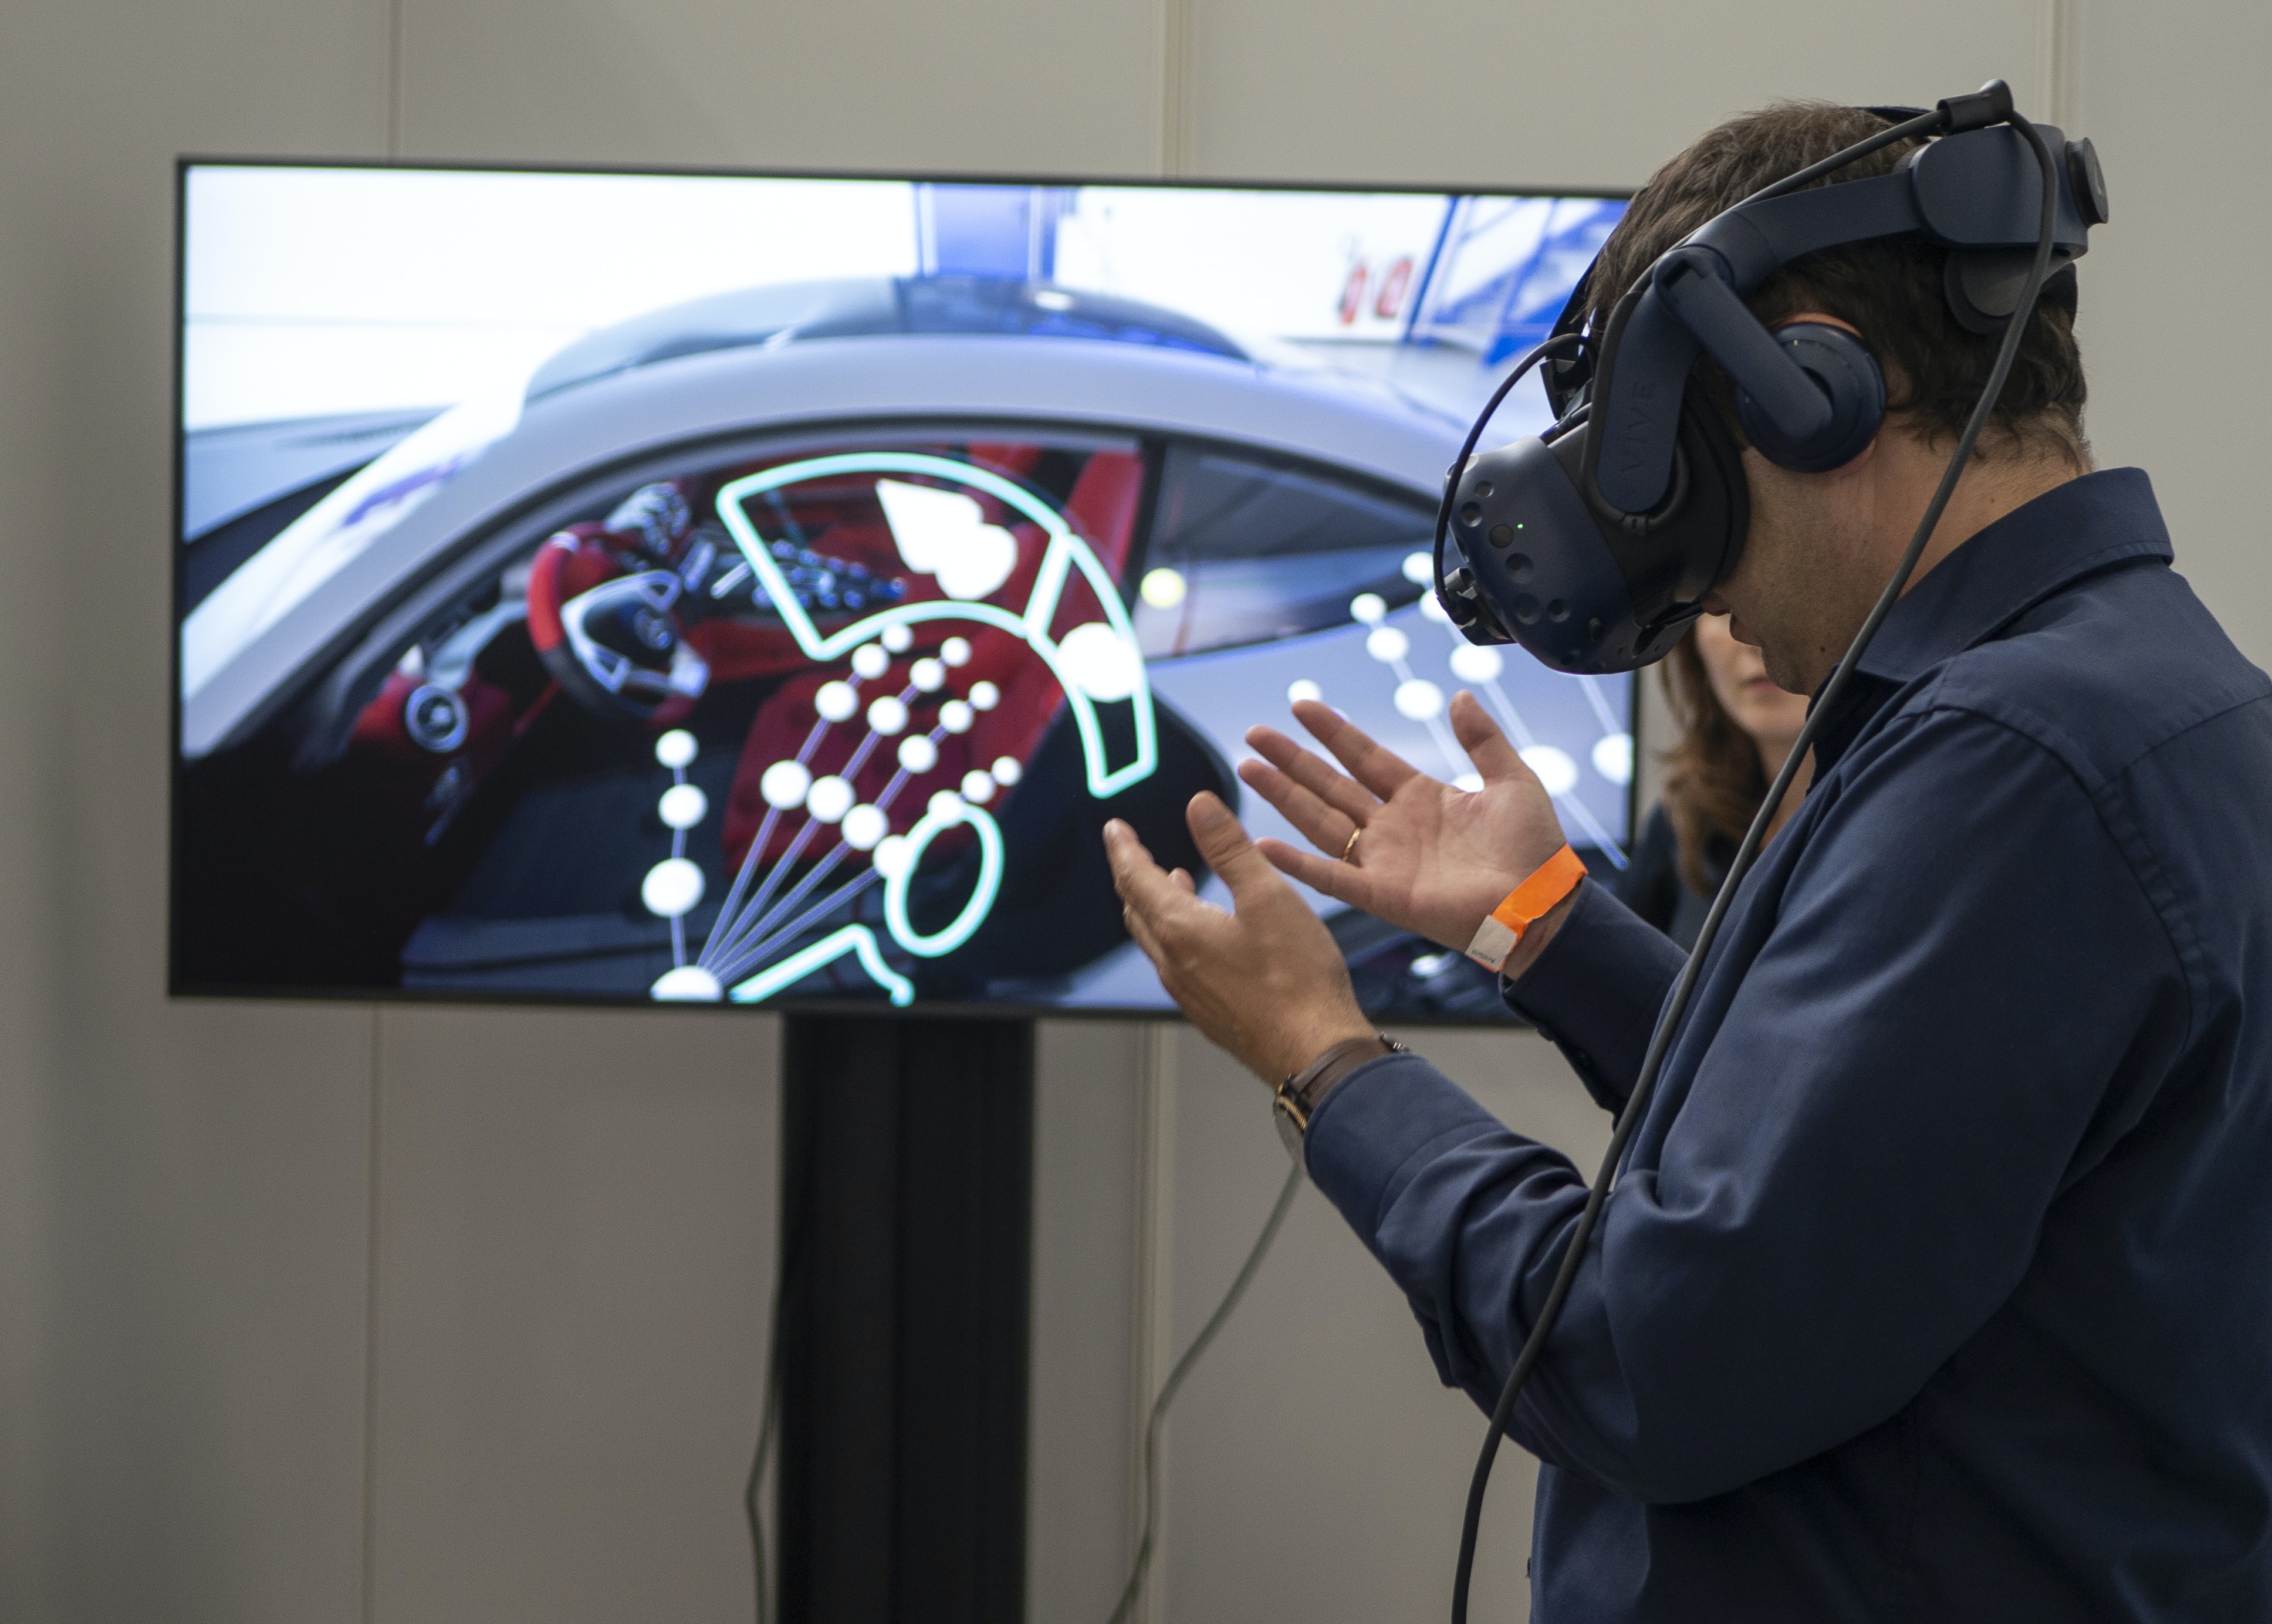 XR Expo 2019: exhibition for virtual reality (vr), augmented reality (ar), mixed reality (mr) and extended reality (xr)